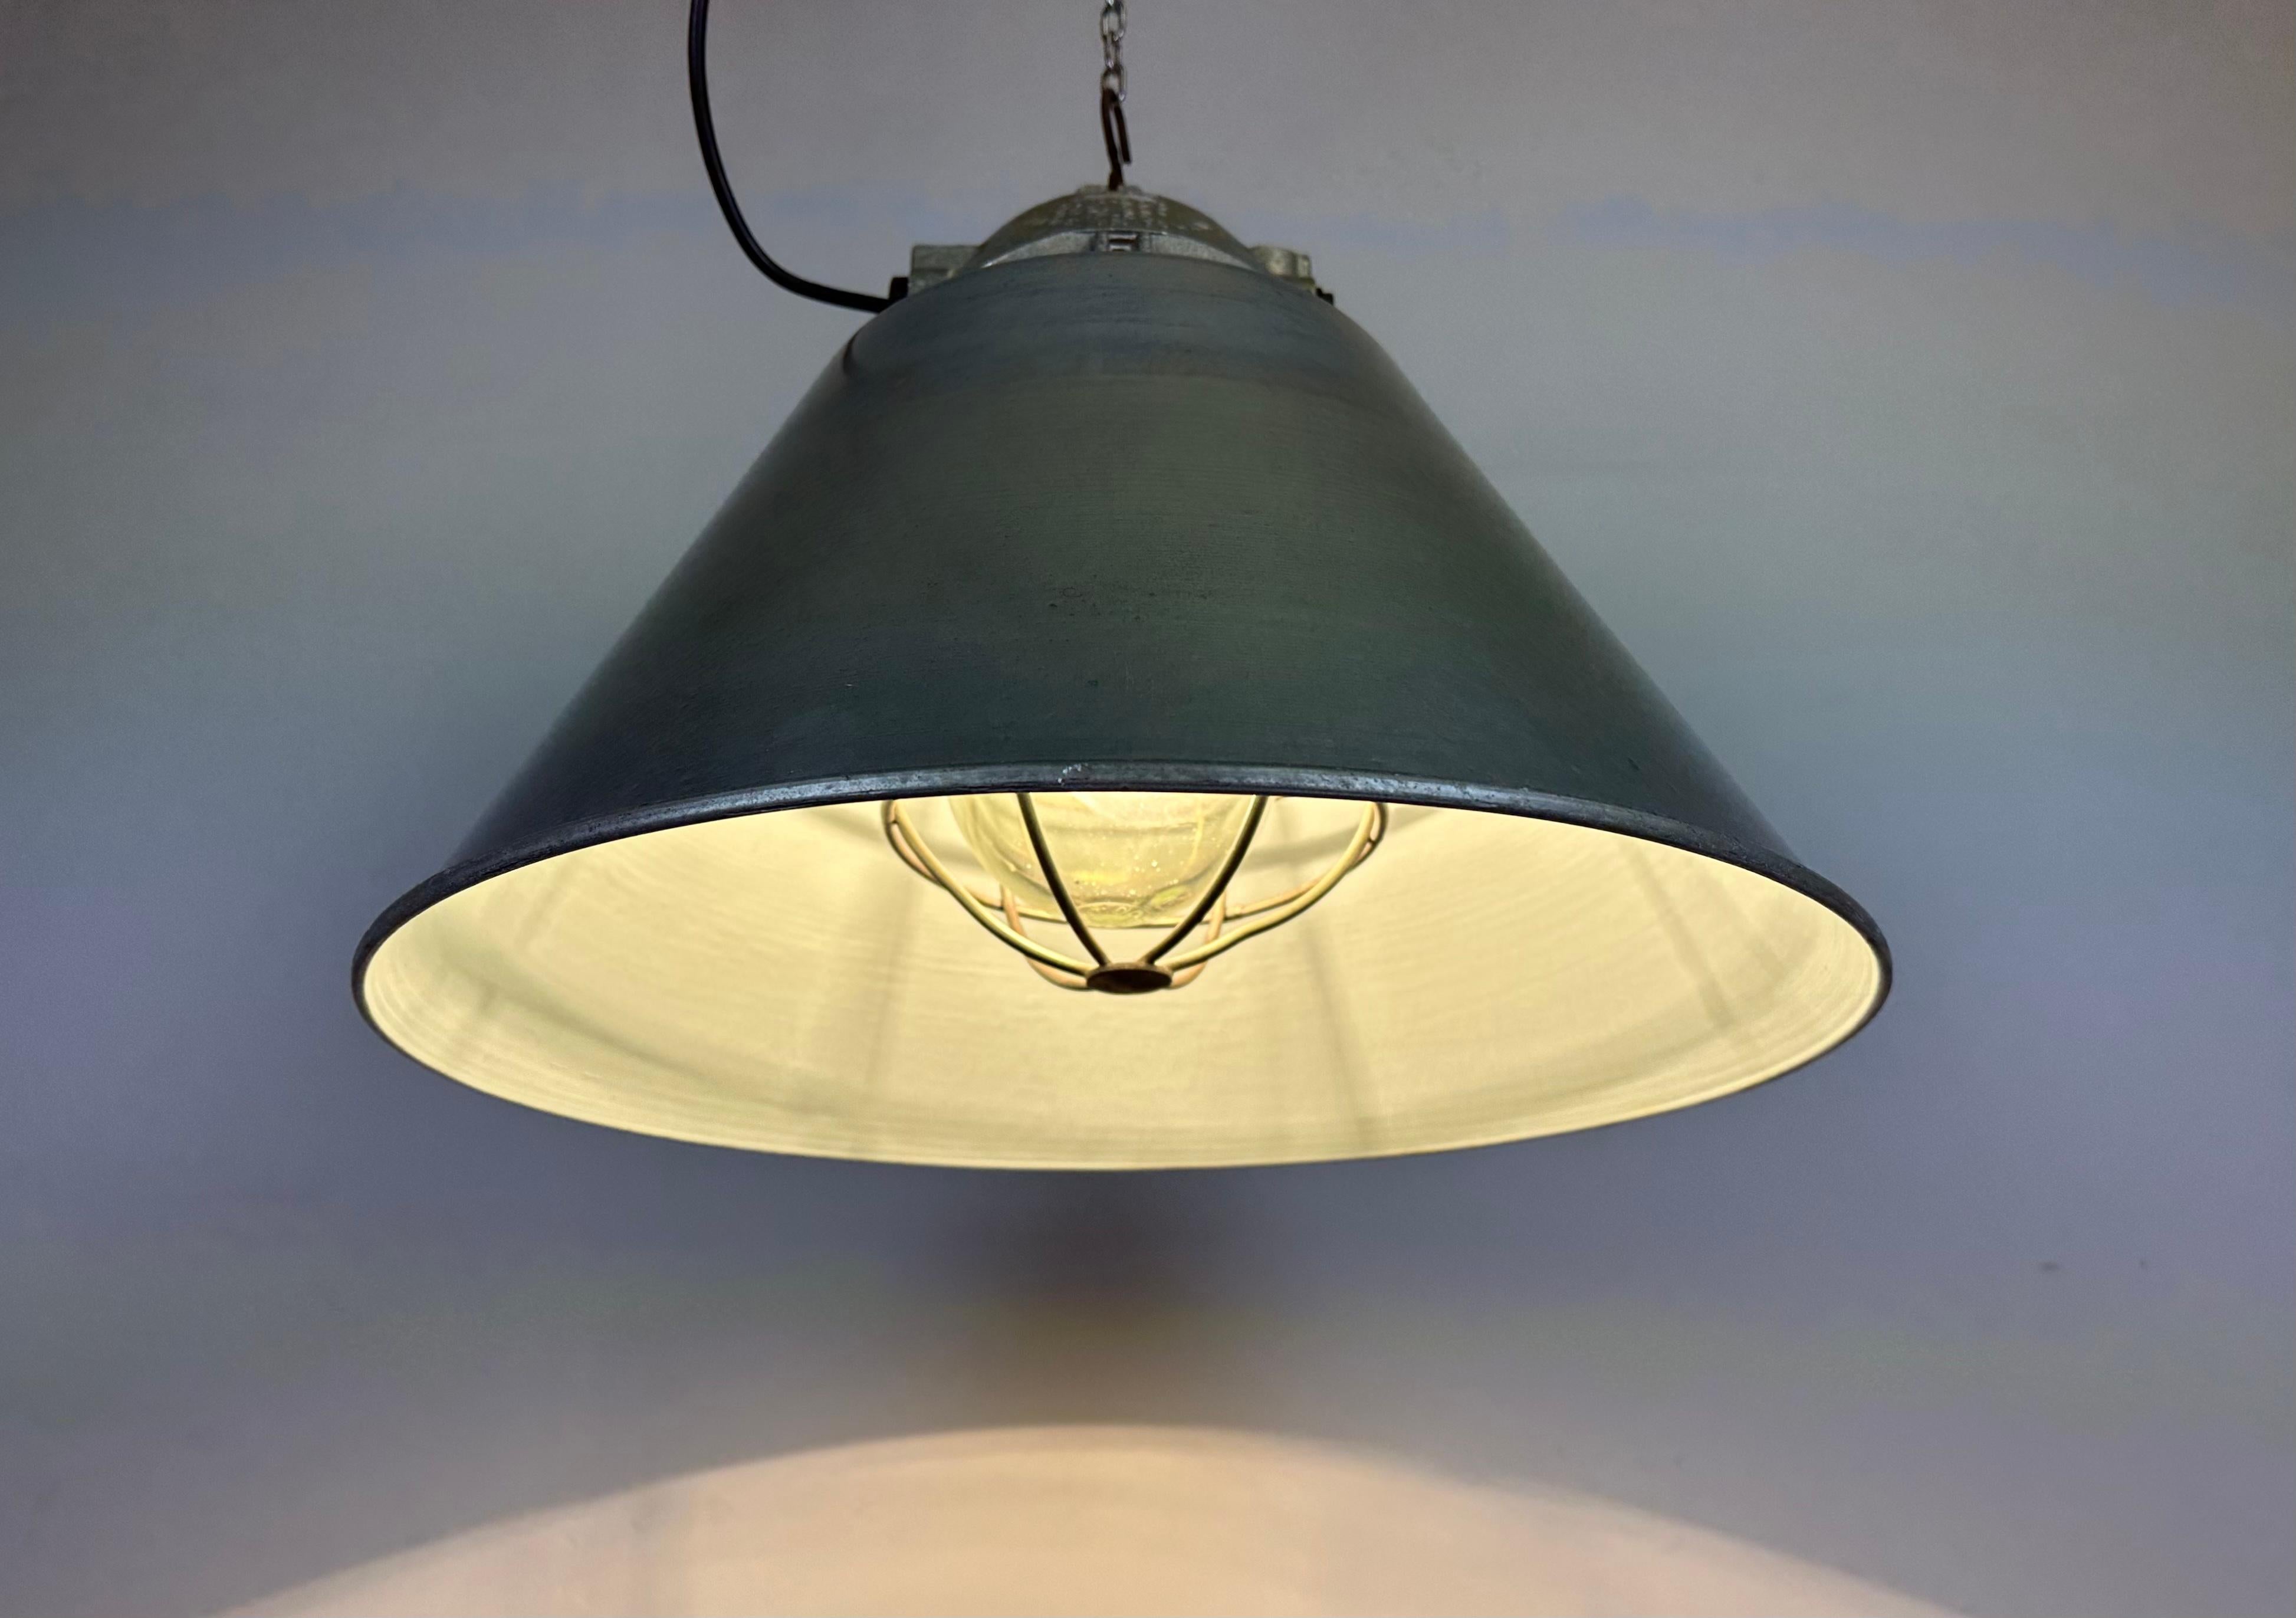 Grey Industrial Explosion Proof Lamp with Aluminum Shade from Zaos, 1970s For Sale 4